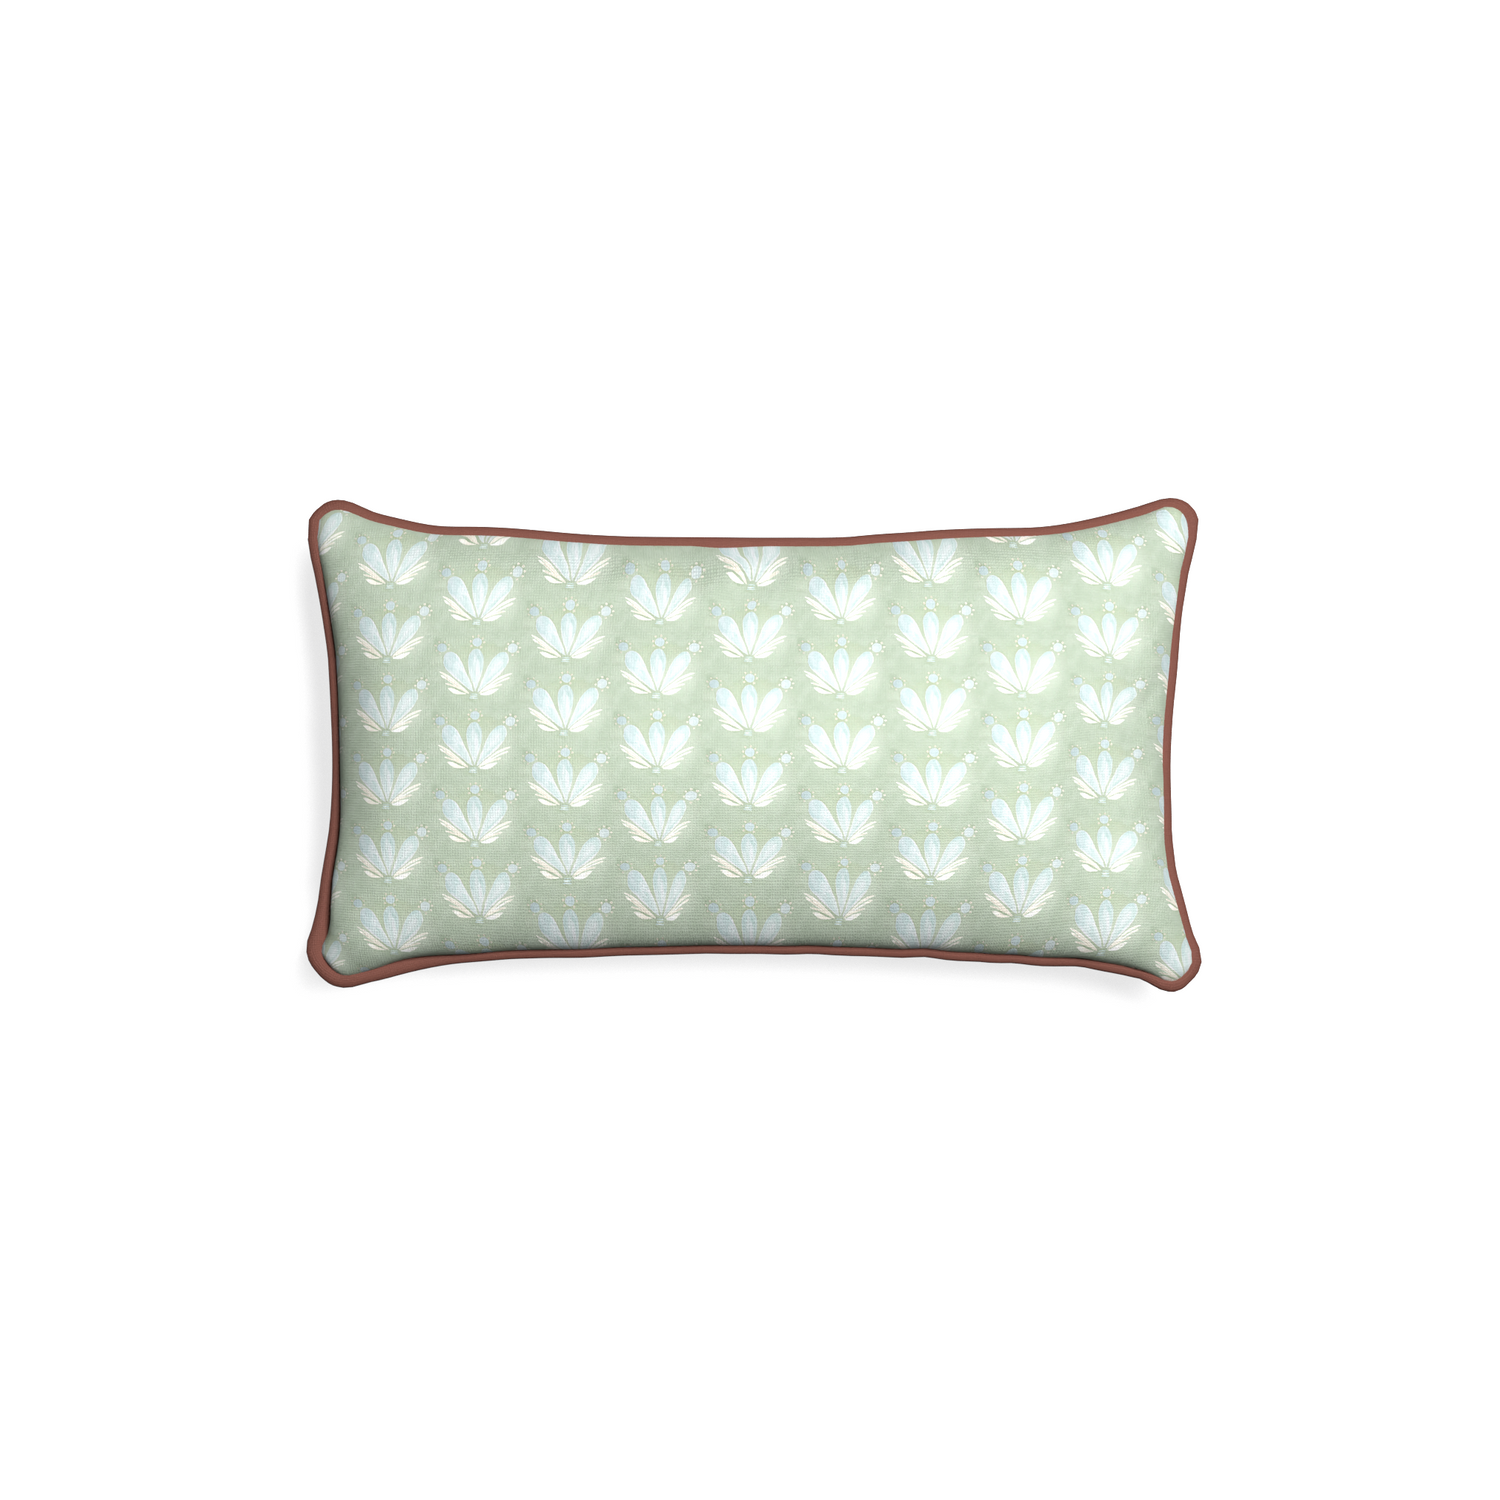 Petite-lumbar serena sea salt custom blue & green floral drop repeatpillow with w piping on white background